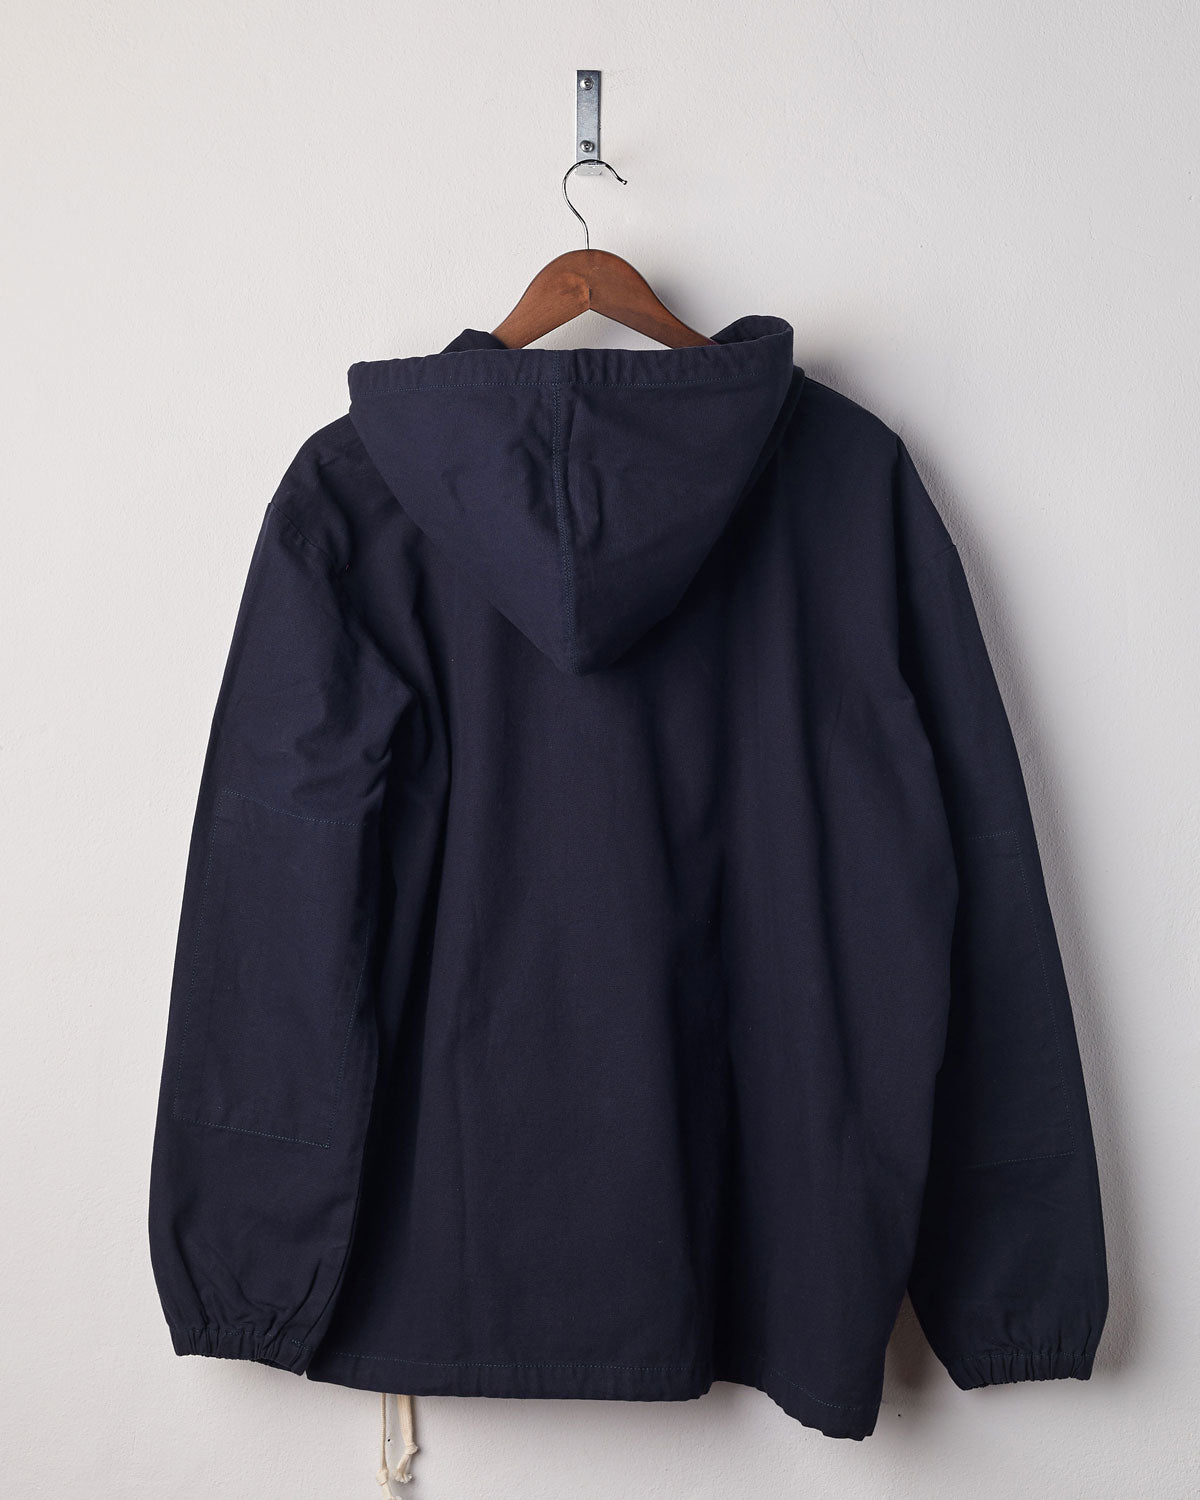 Back view of midnight blue coloured buttoned smock from Uskees with view of hood. Presented on hanger with white backdrop.